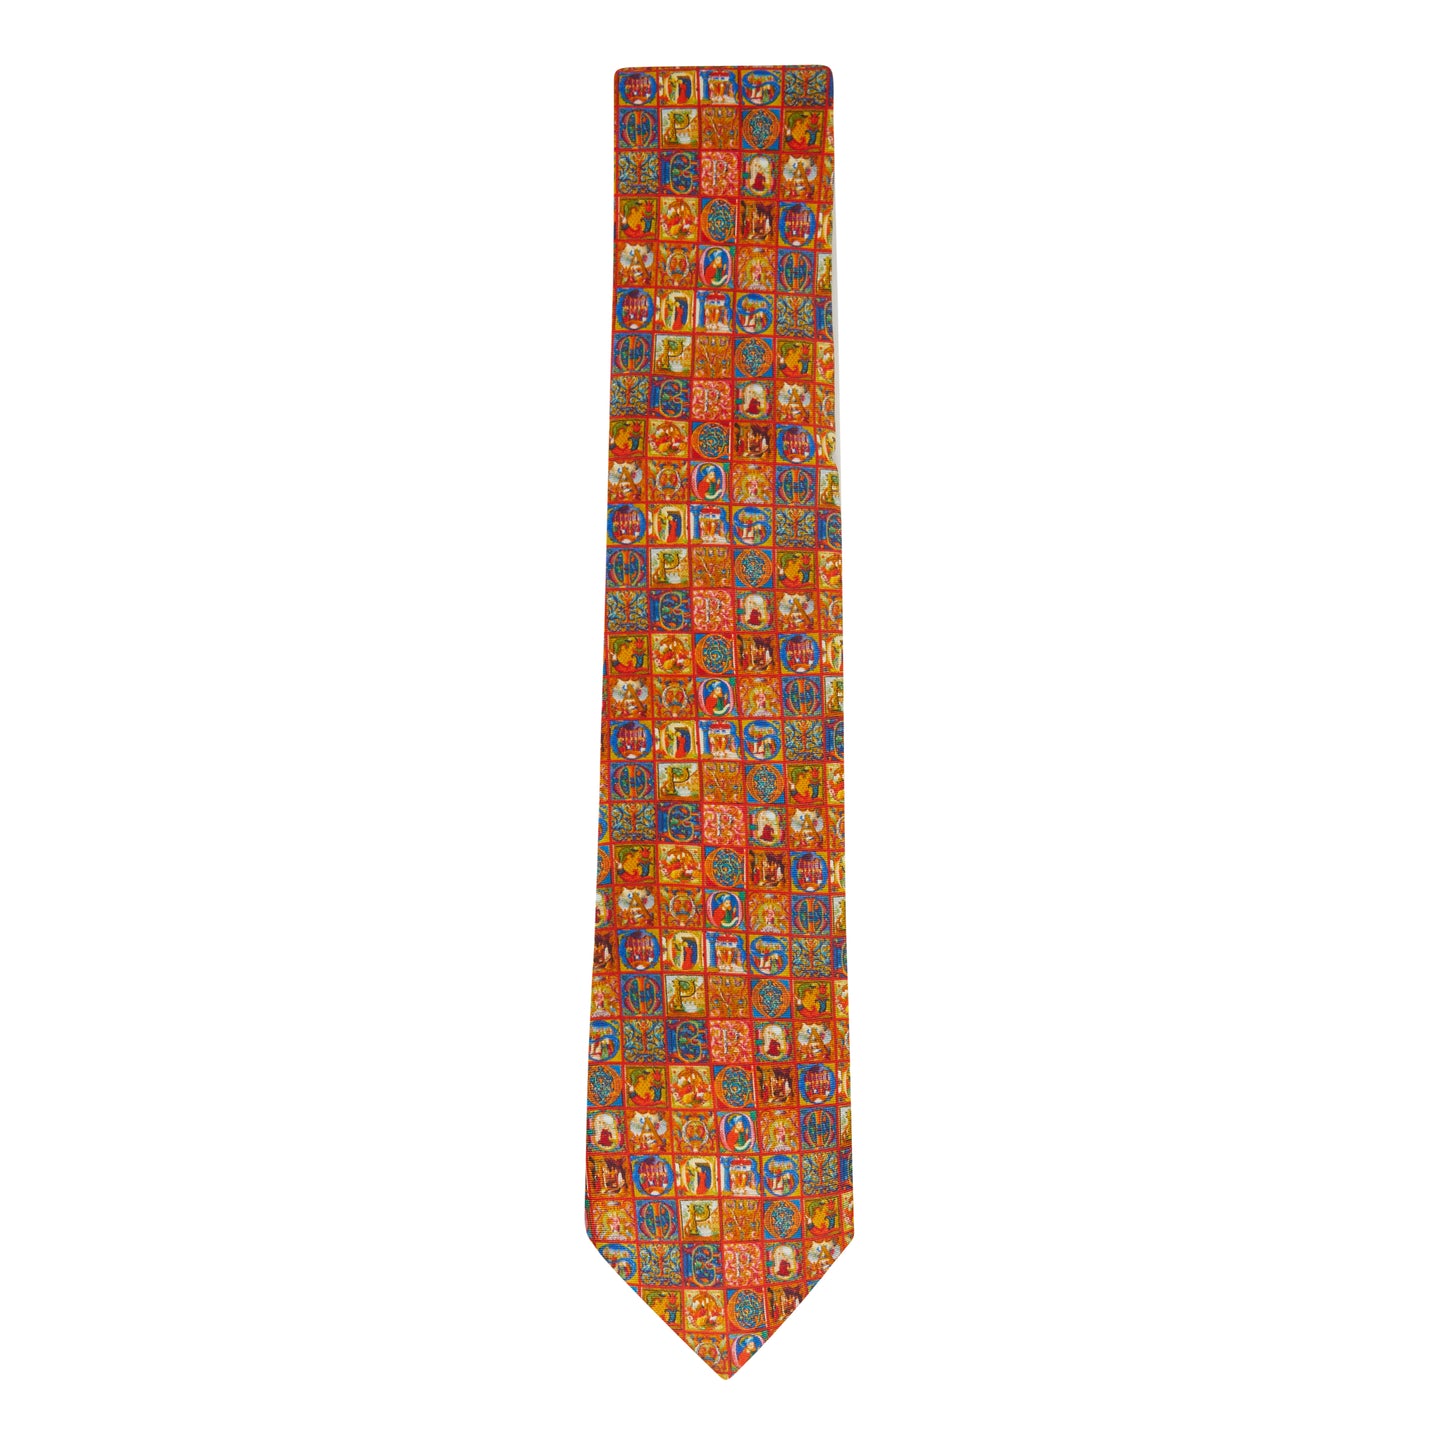 Red silk tie with illuminated letters in blue, red, gold and other colours. From the collection of the Fitzwilliam Museum.